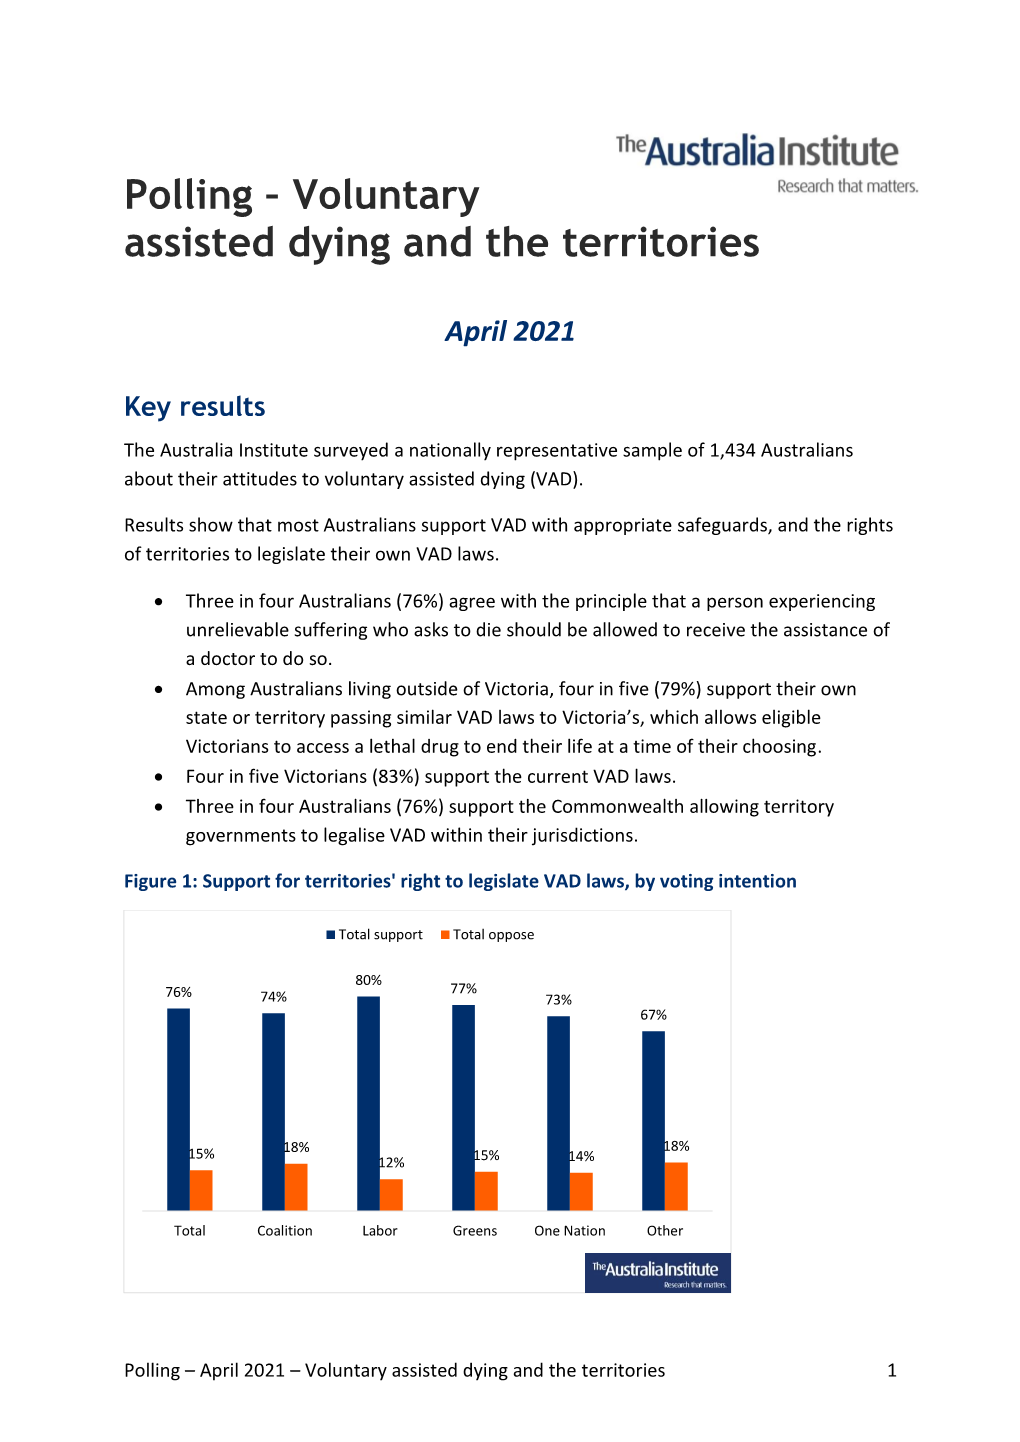 Polling – Voluntary Assisted Dying and the Territories